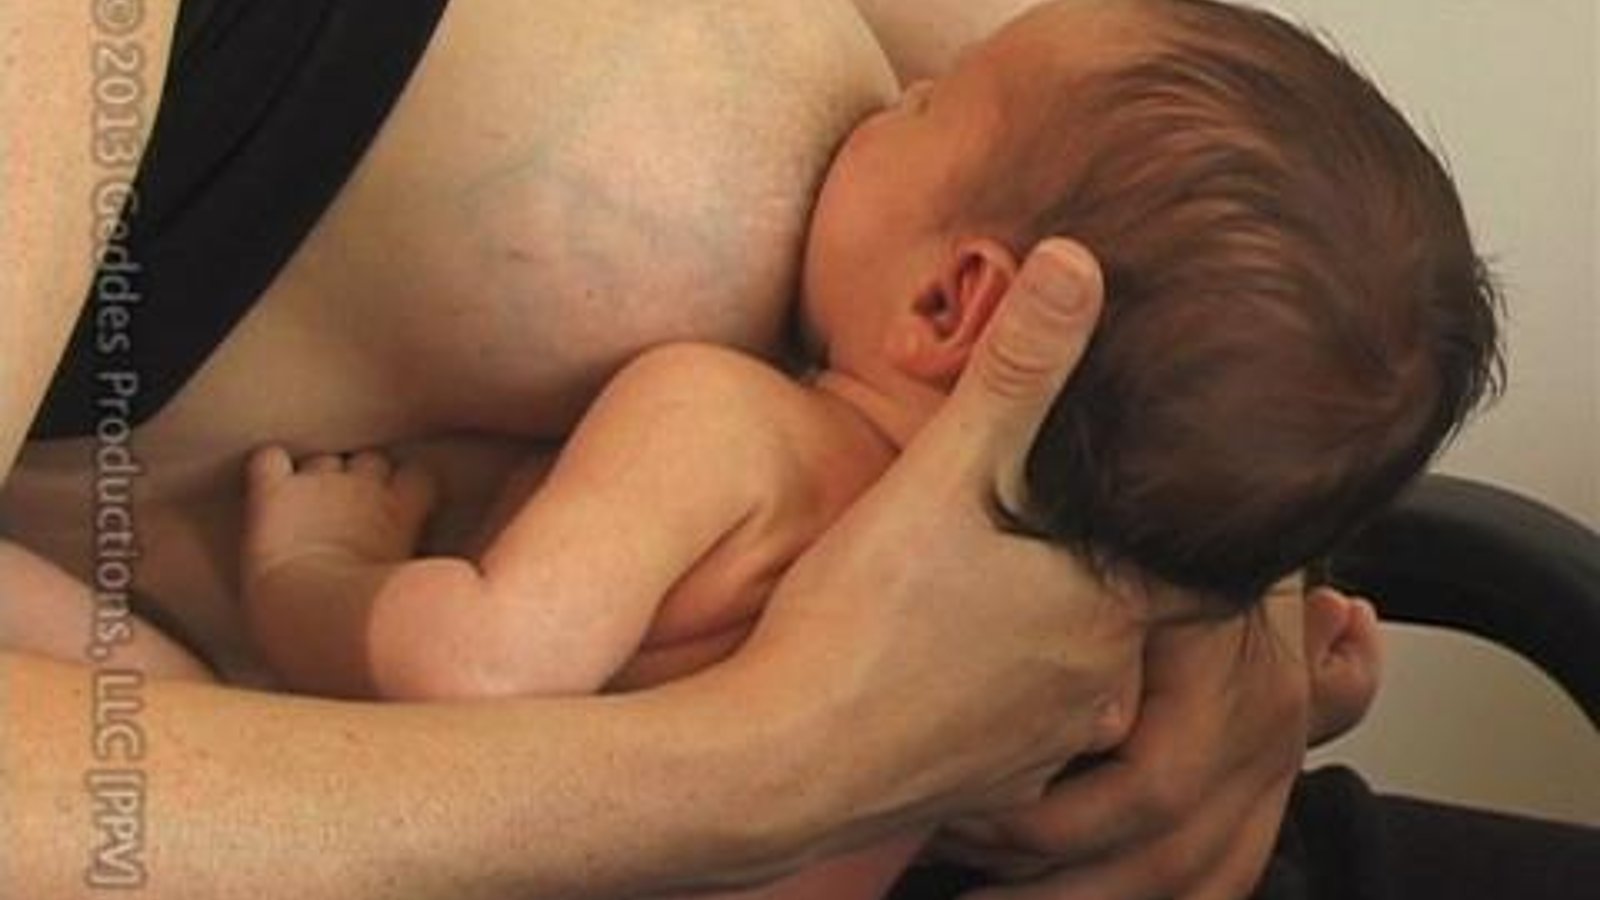 Breastfeeding: Even More Positions